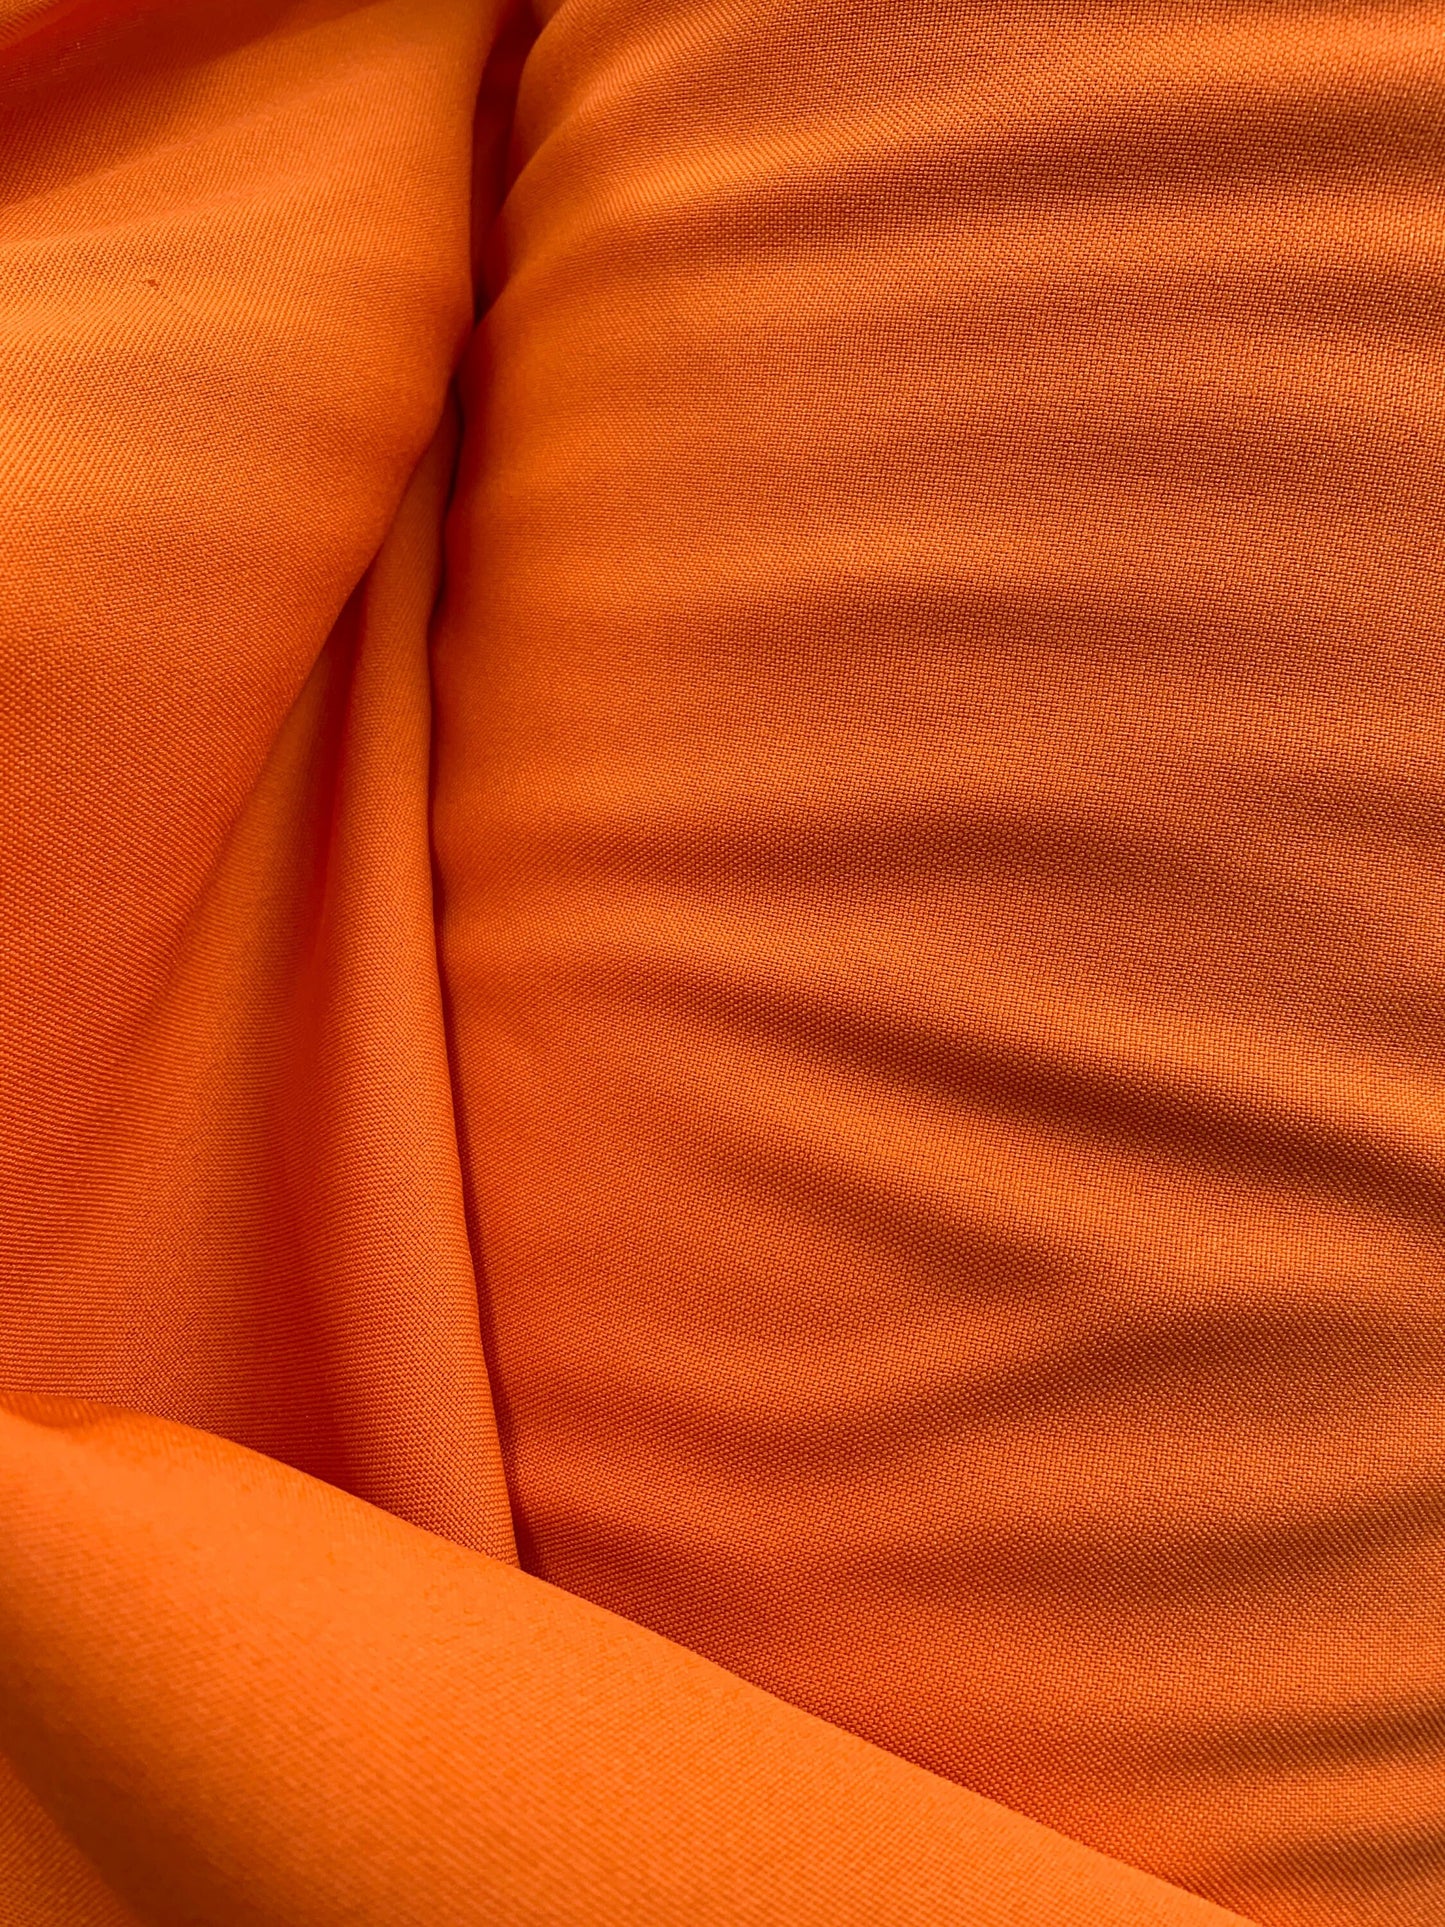 ORANGE 100% Polyester Poplin Fabric (60 in.) Sold By The Yard